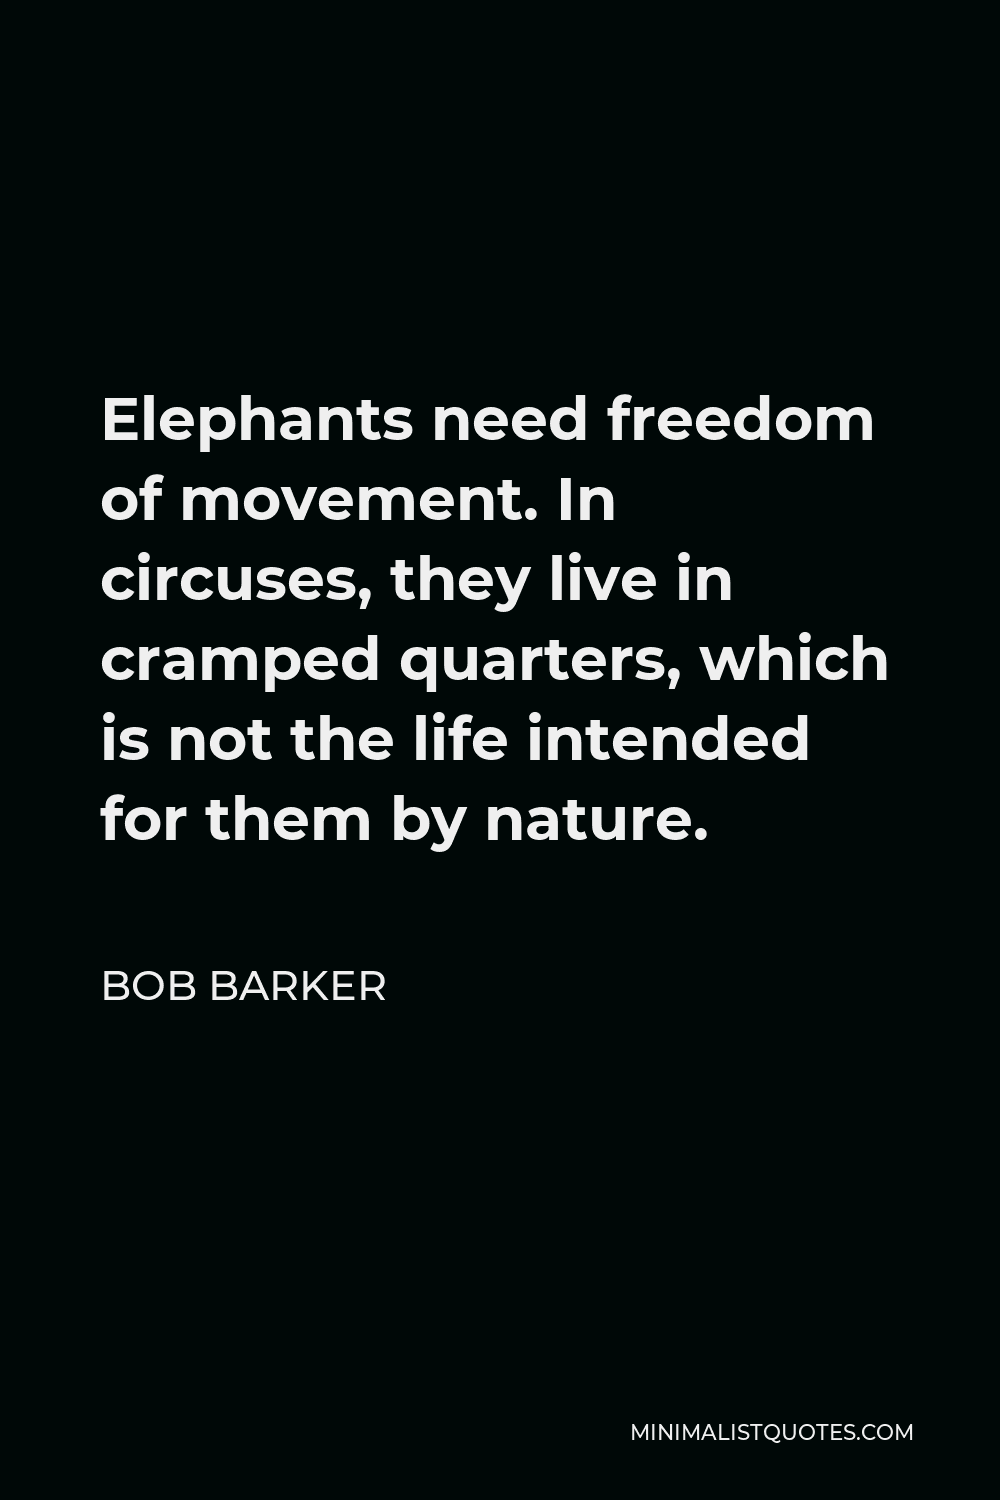 Bob Barker Quote - Elephants need freedom of movement. In circuses, they live in cramped quarters, which is not the life intended for them by nature.